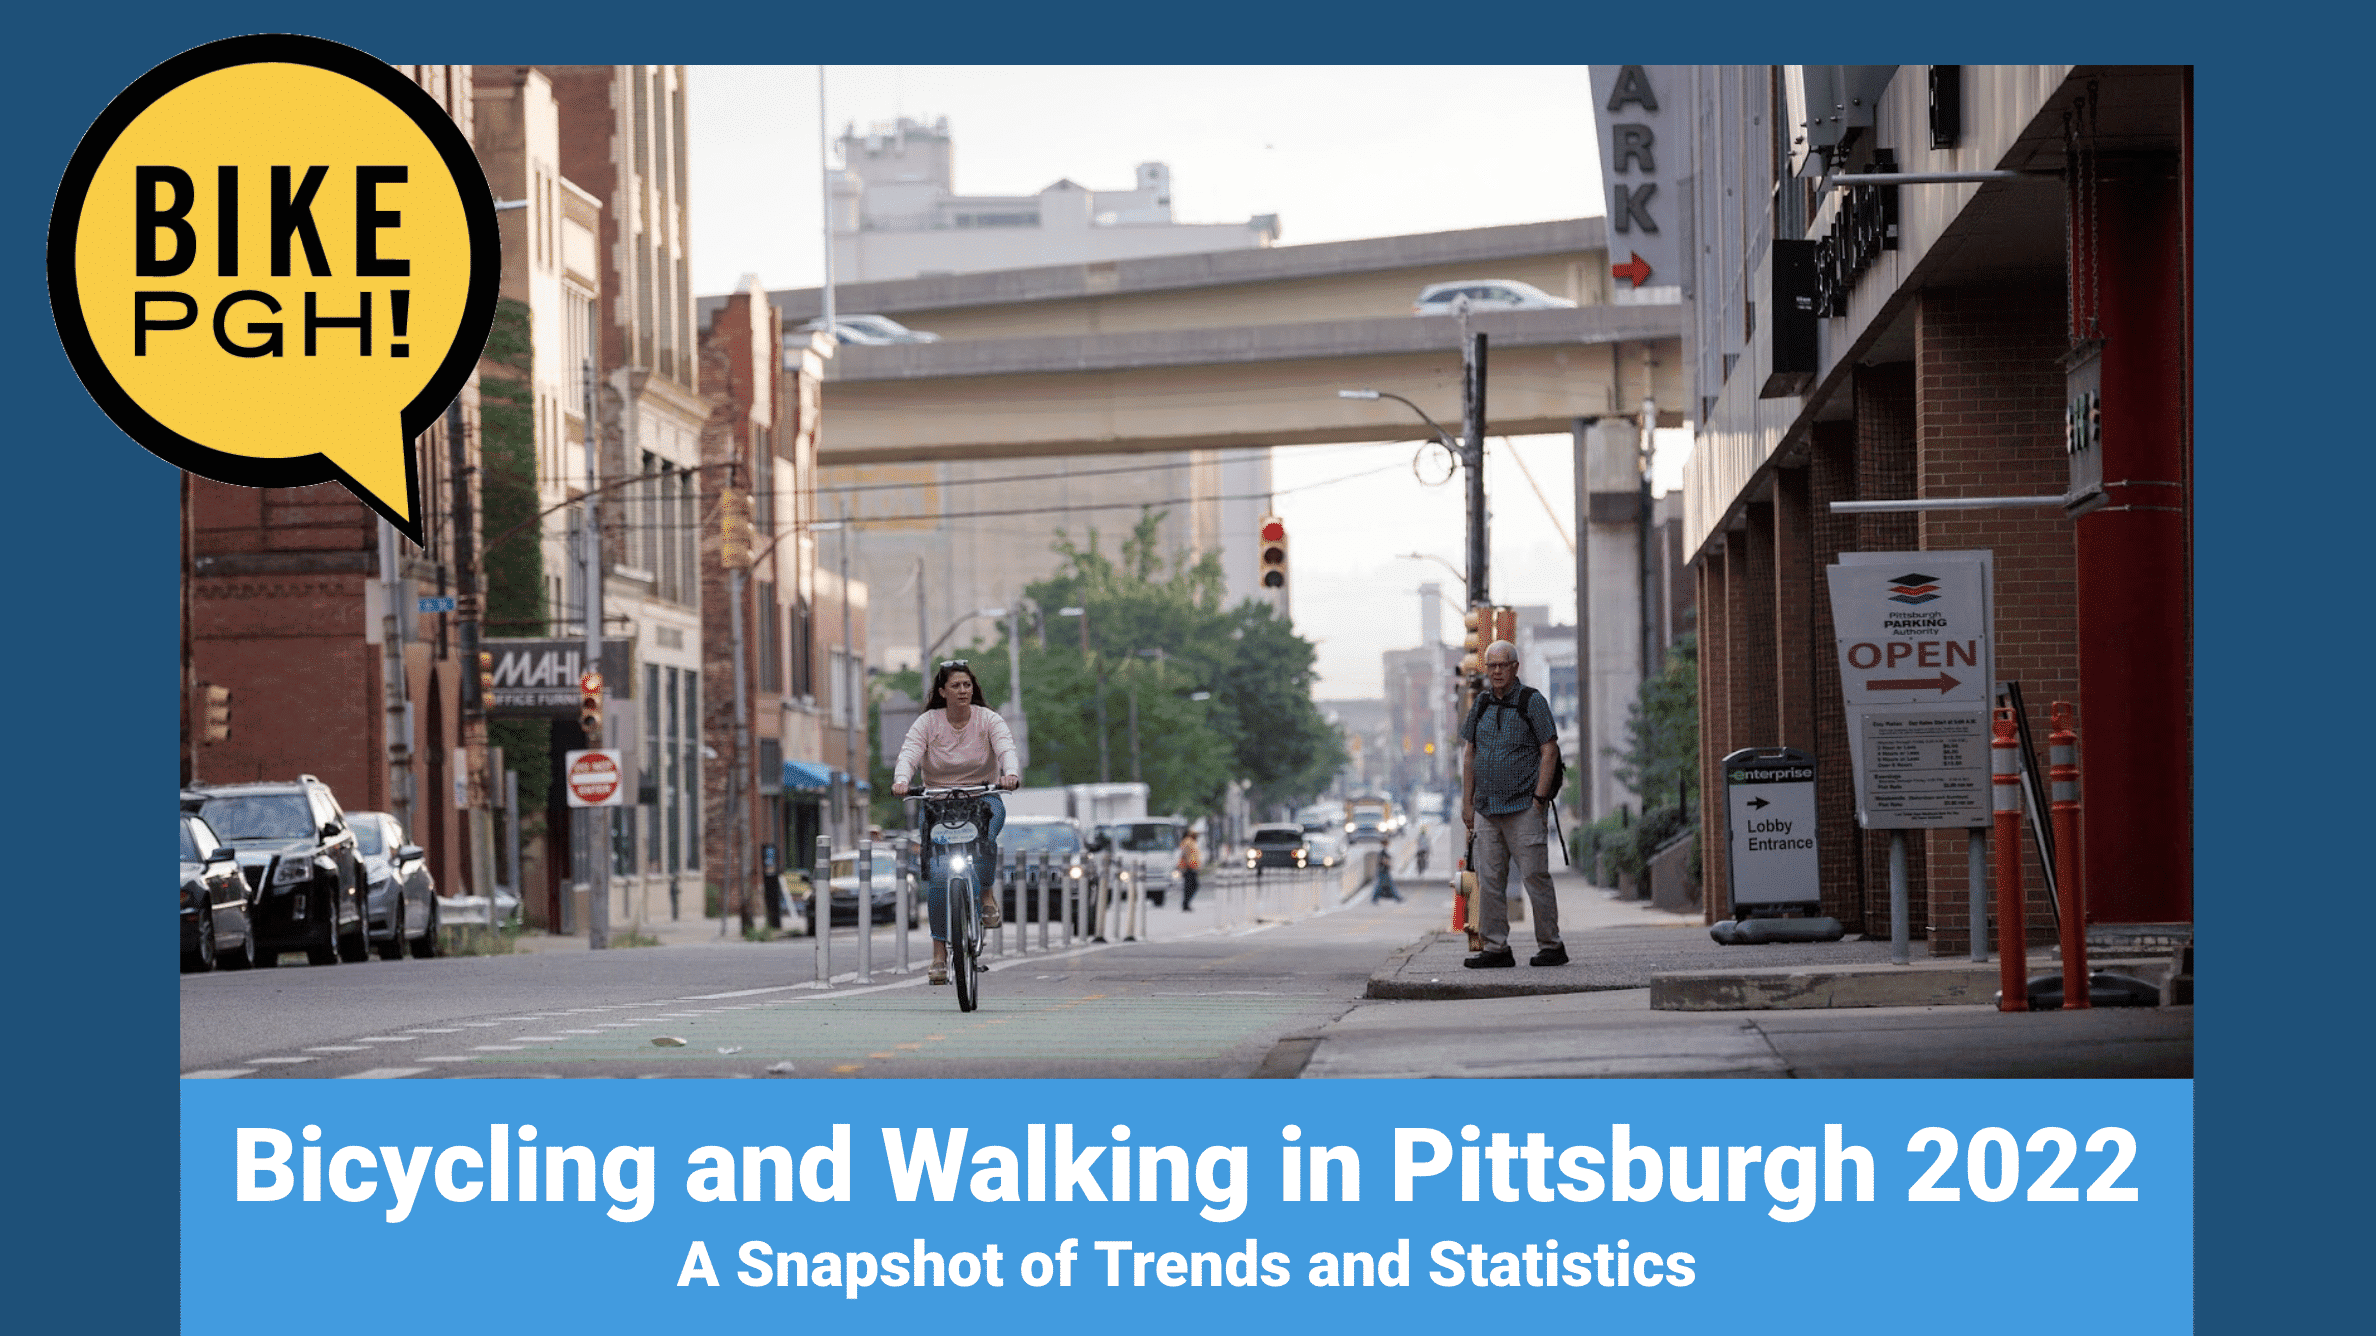 Cover of the report shows a view of the Penn Ave bike lane with a female rider in it and a male pedestrian on the adjacent sidewalk